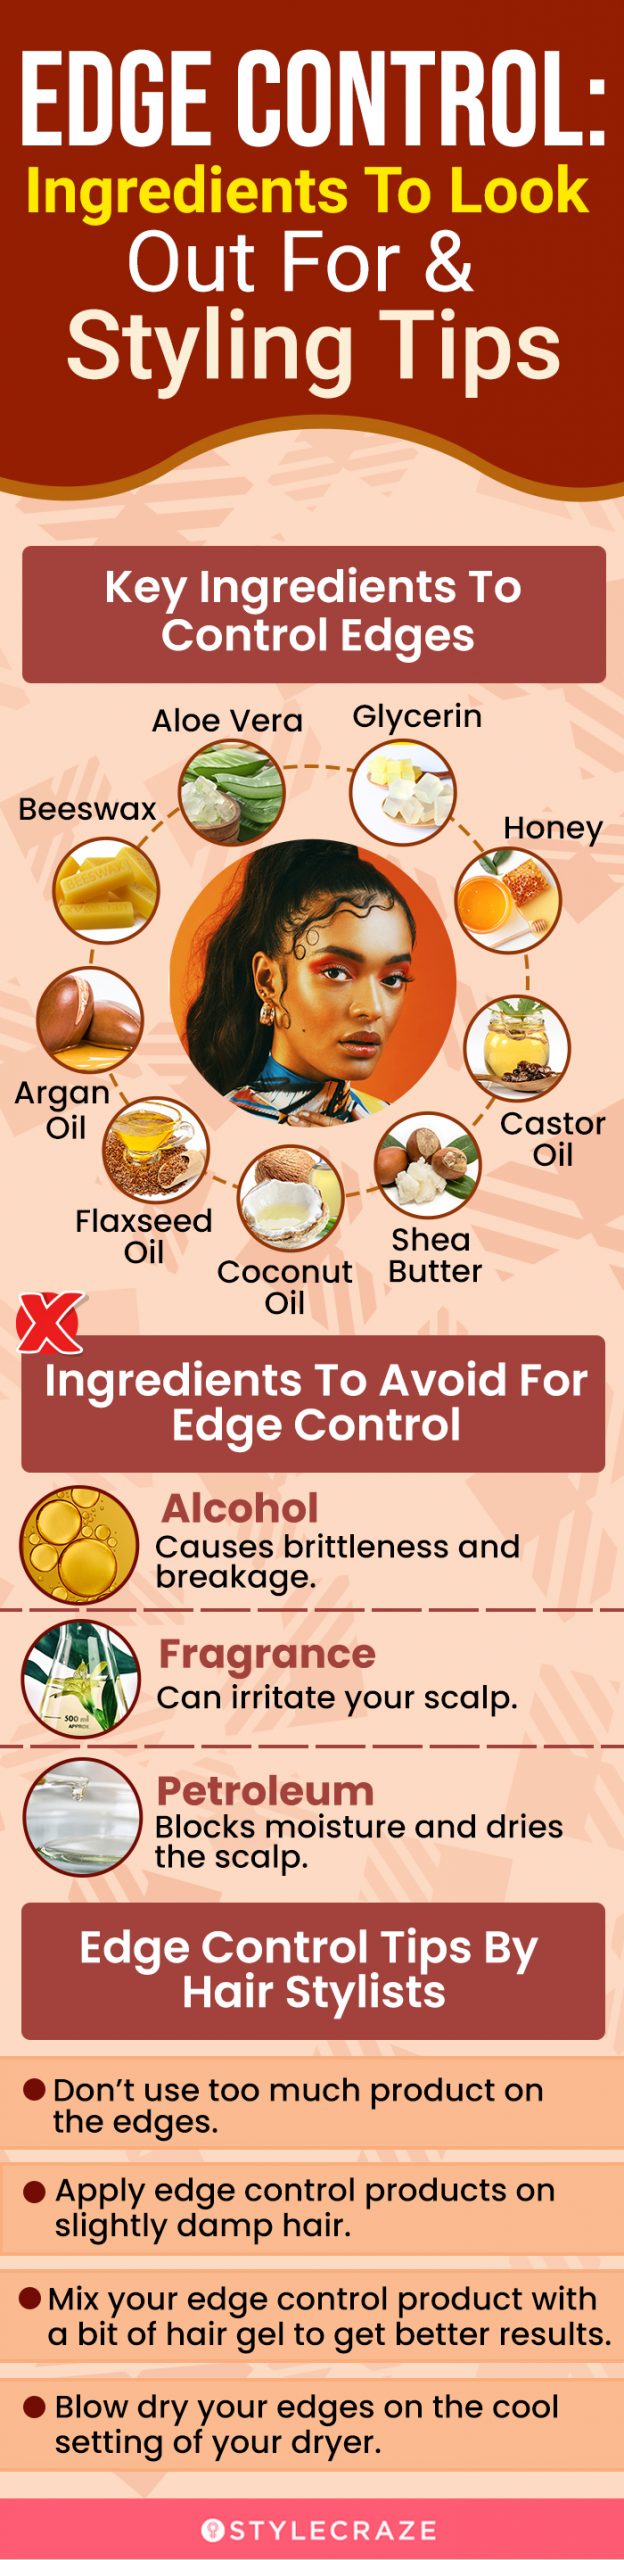 Edge Control: Ingredients To Look Out For (infographic)